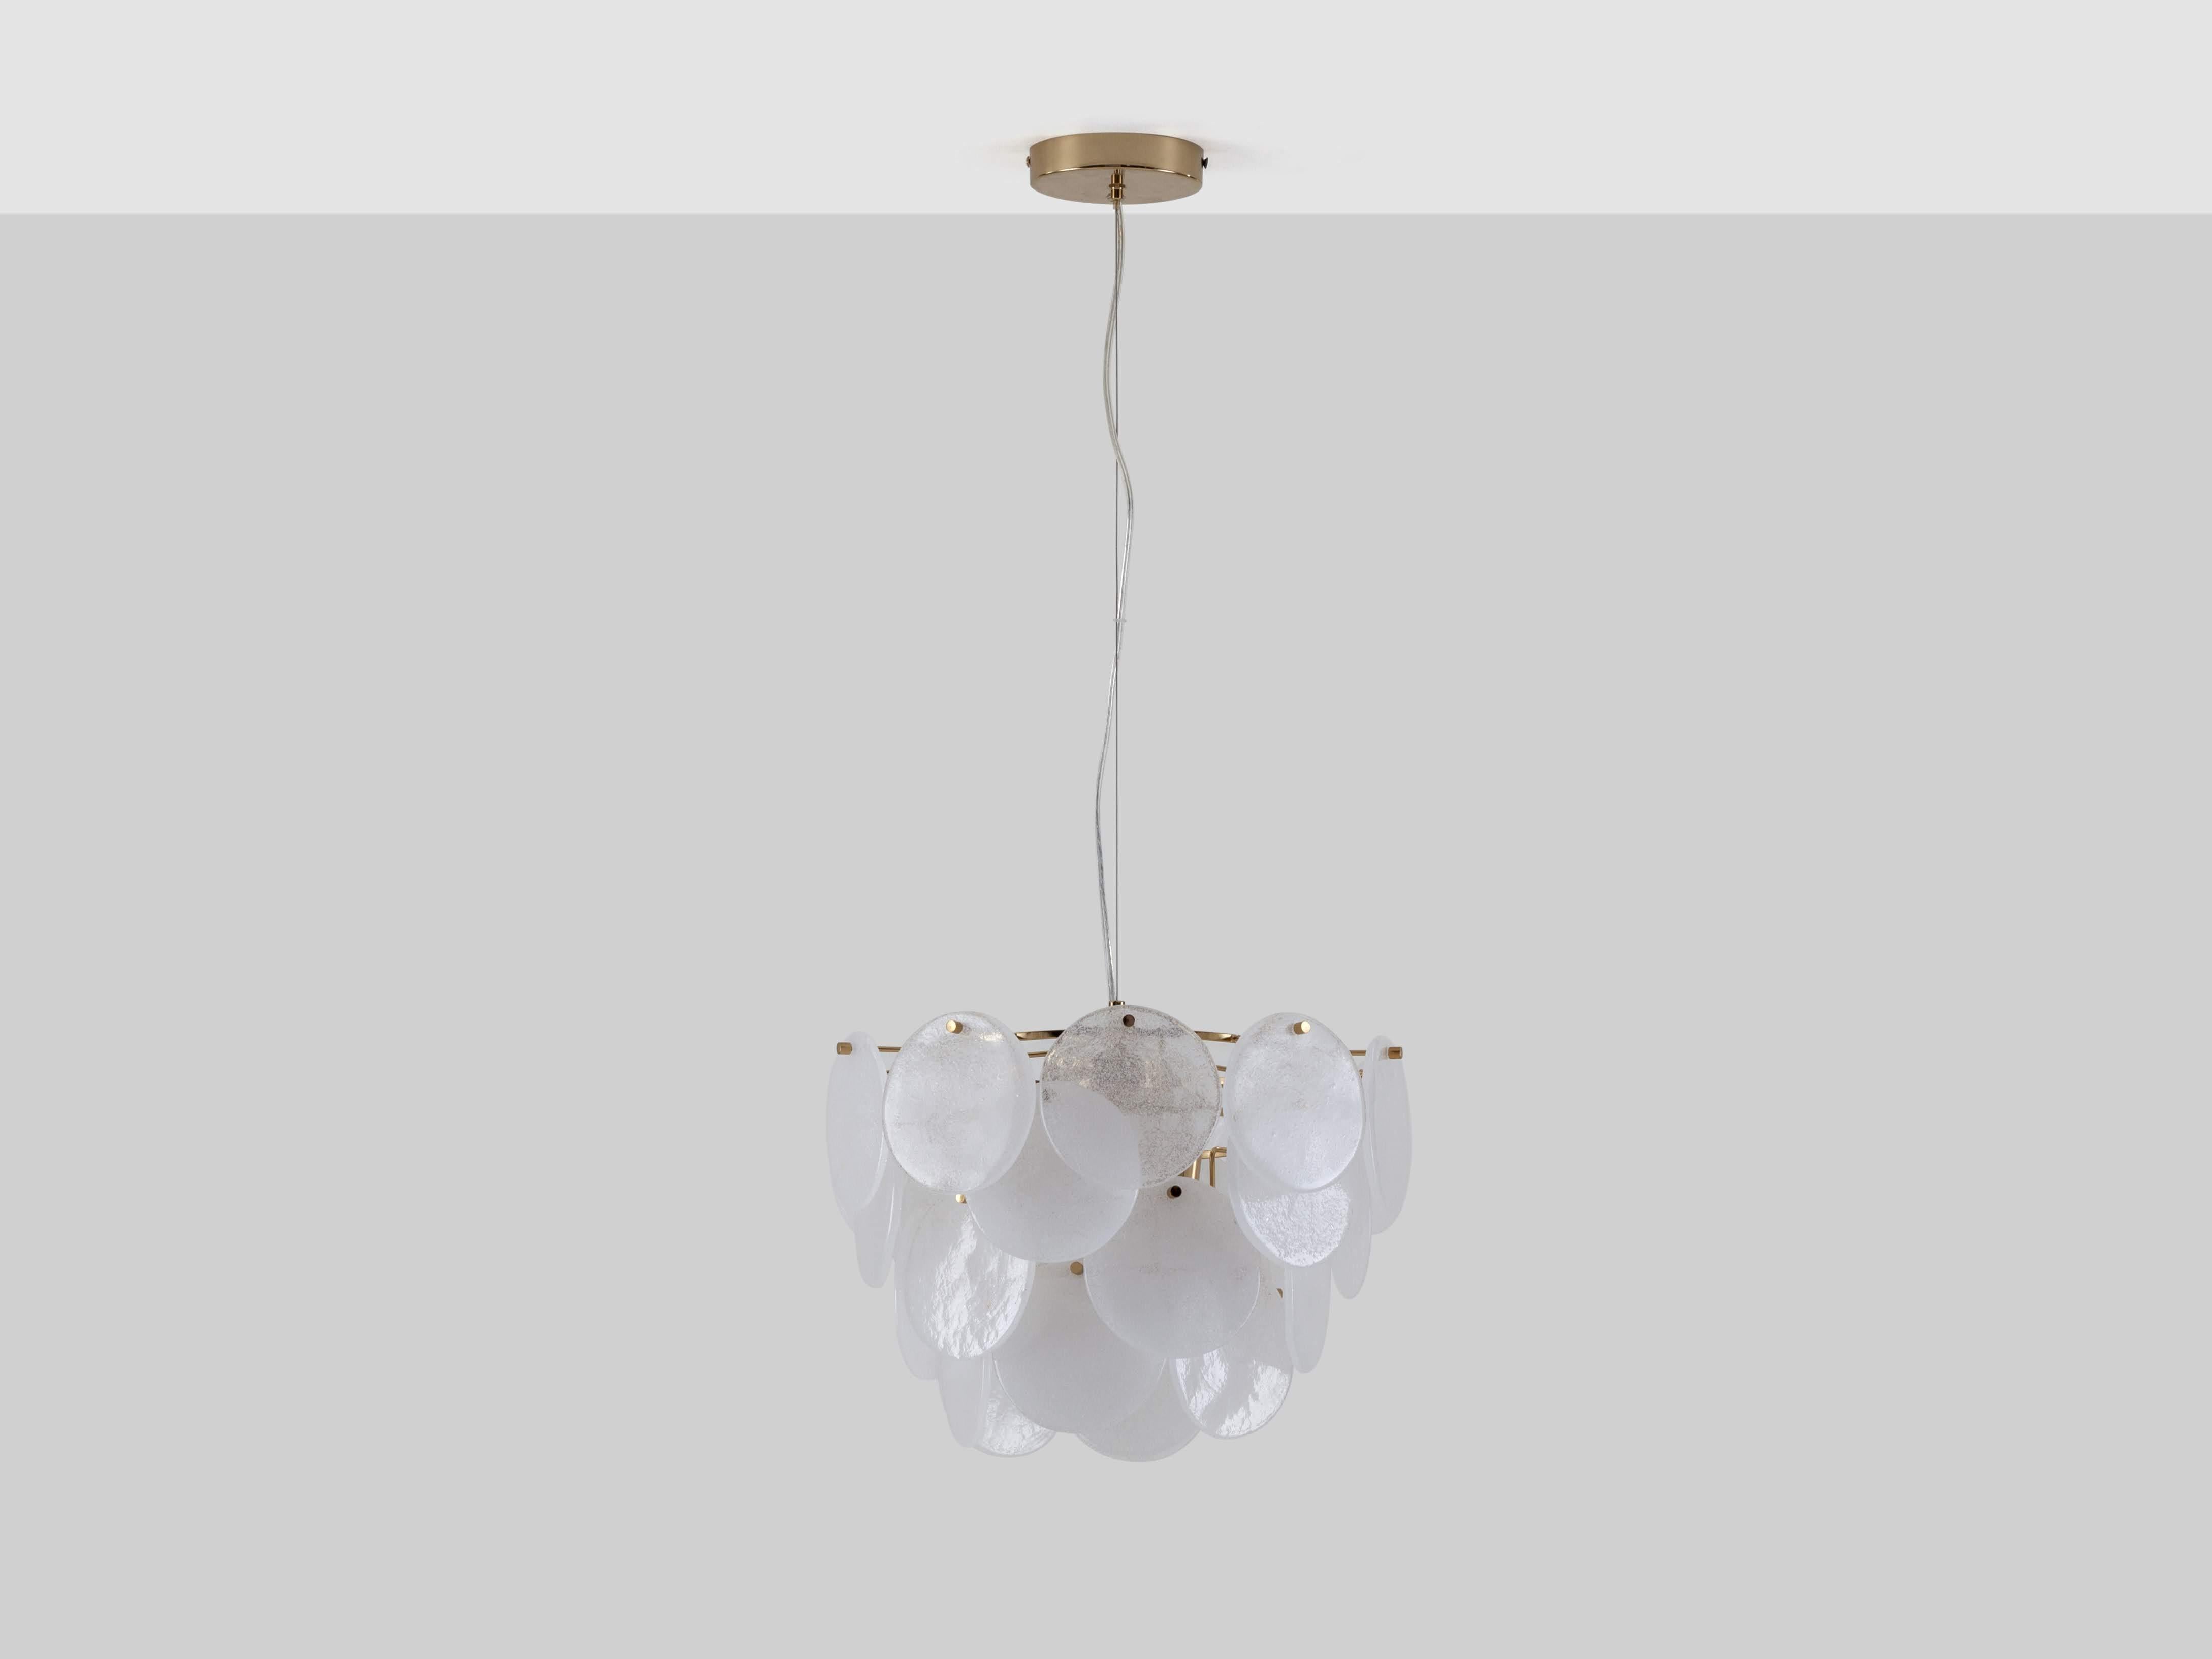 An elegant chandelier, perfect even for smaller rooms, this piece has become an icon in the houseof collection. Suspended on a brass frame, the glass disks delicately refract light across the room, creating a warm ambient glow. Ideal for styling in